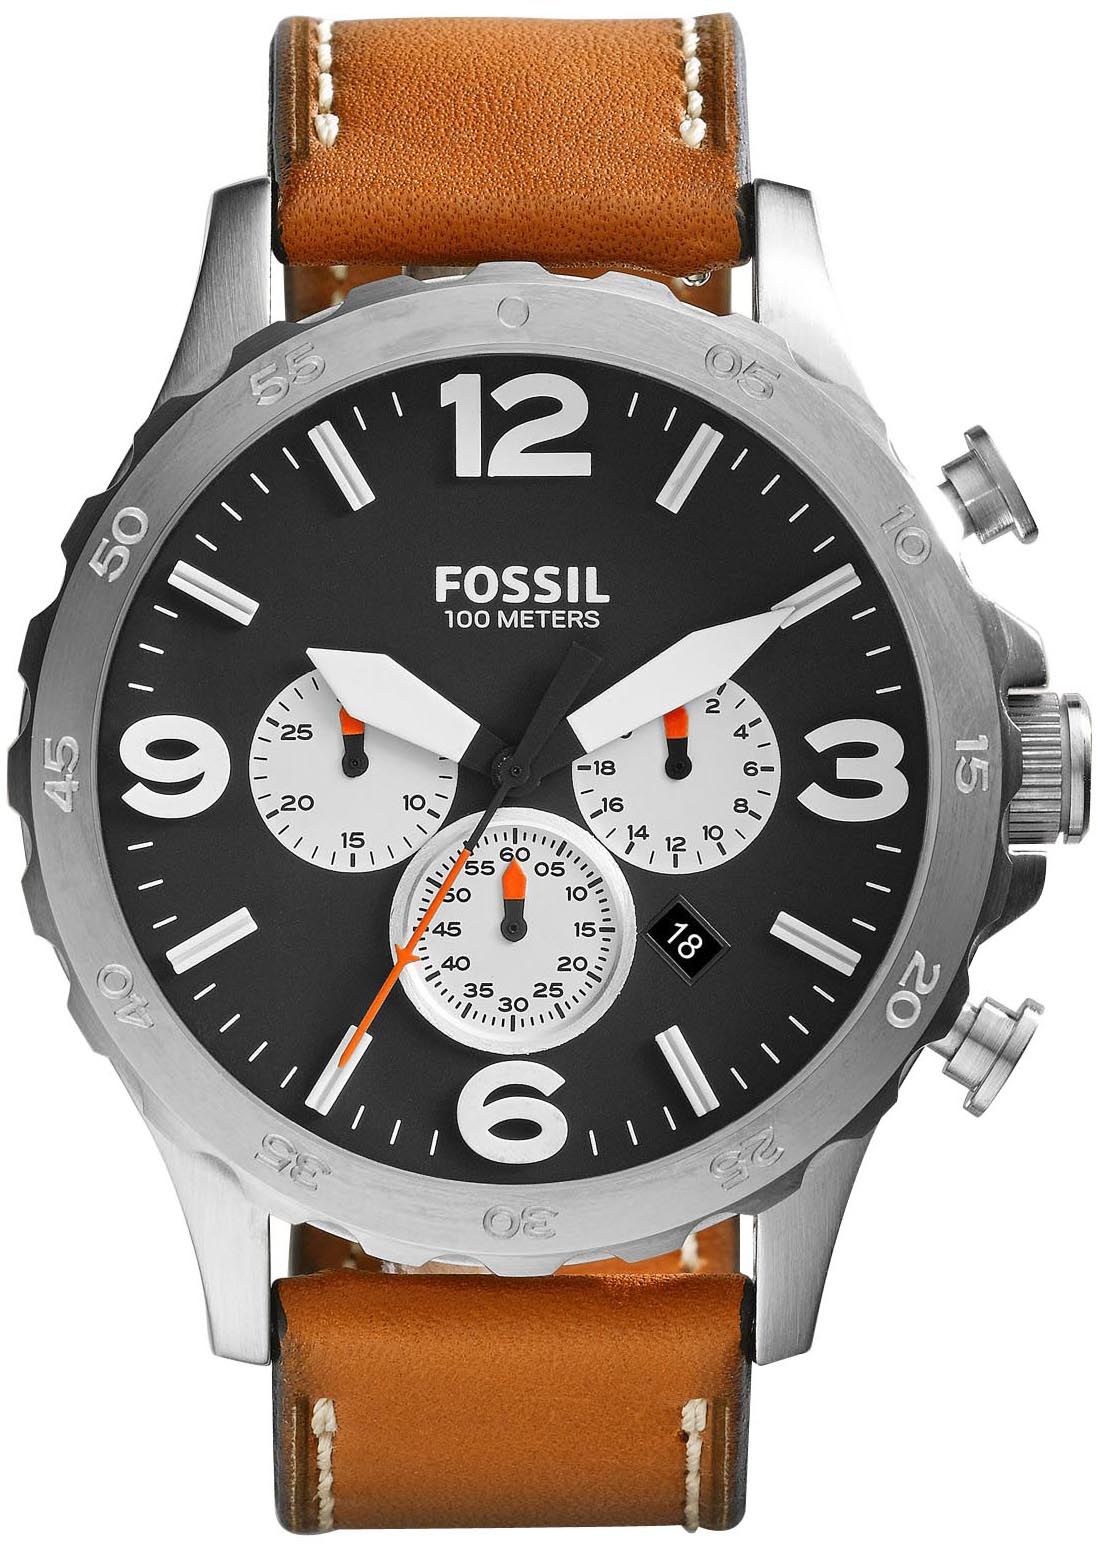 Fossil Nate Chronograph Smoke Stainless Steel Watch For Men price in  Bahrain, Buy Fossil Nate Chronograph Smoke Stainless Steel Watch For Men in  Bahrain.